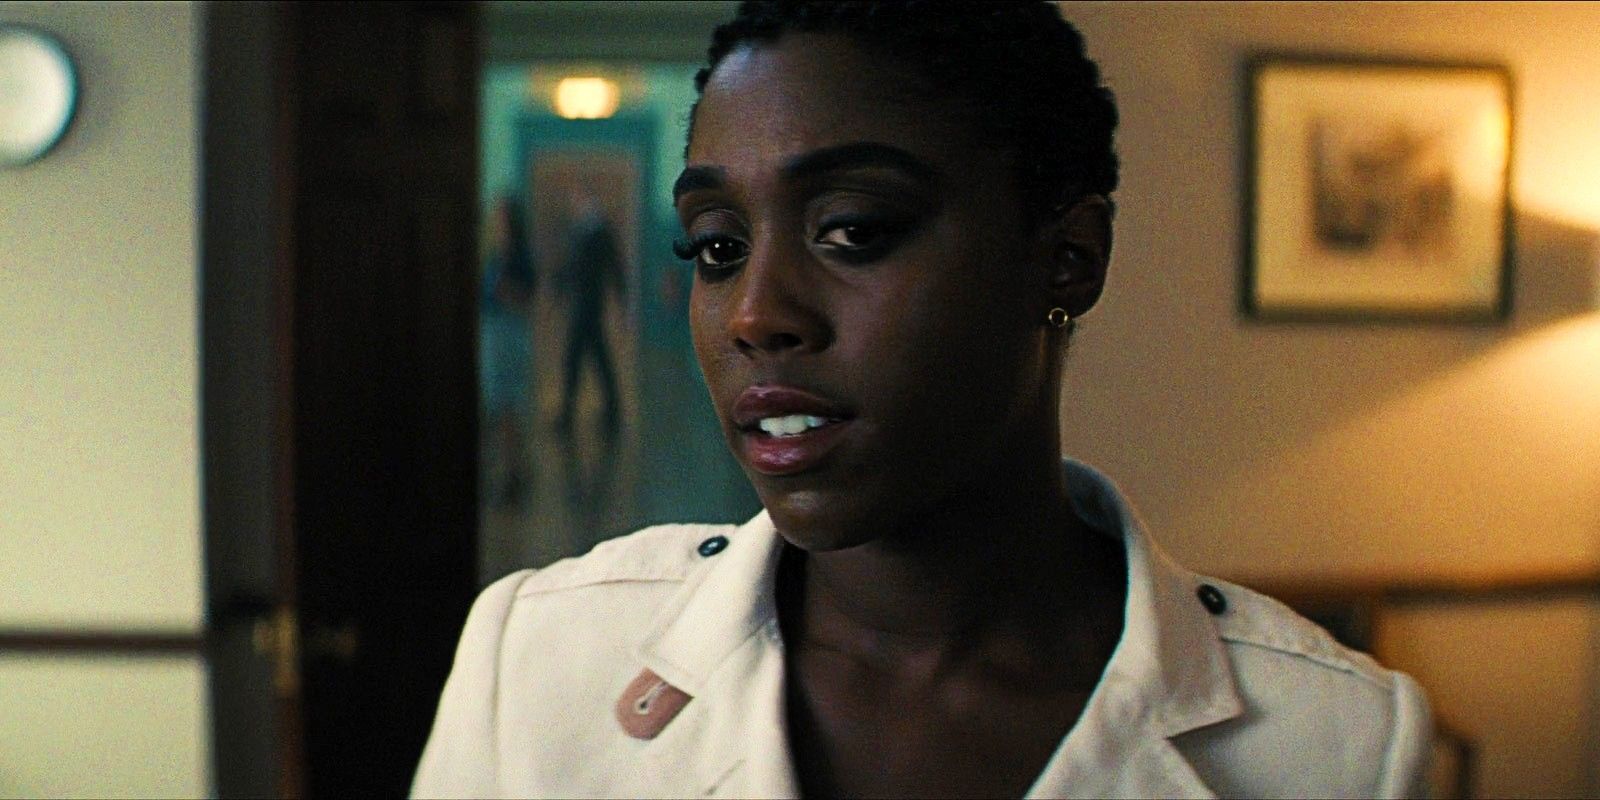 Lashana Lynch as Nomi in No Time to Die